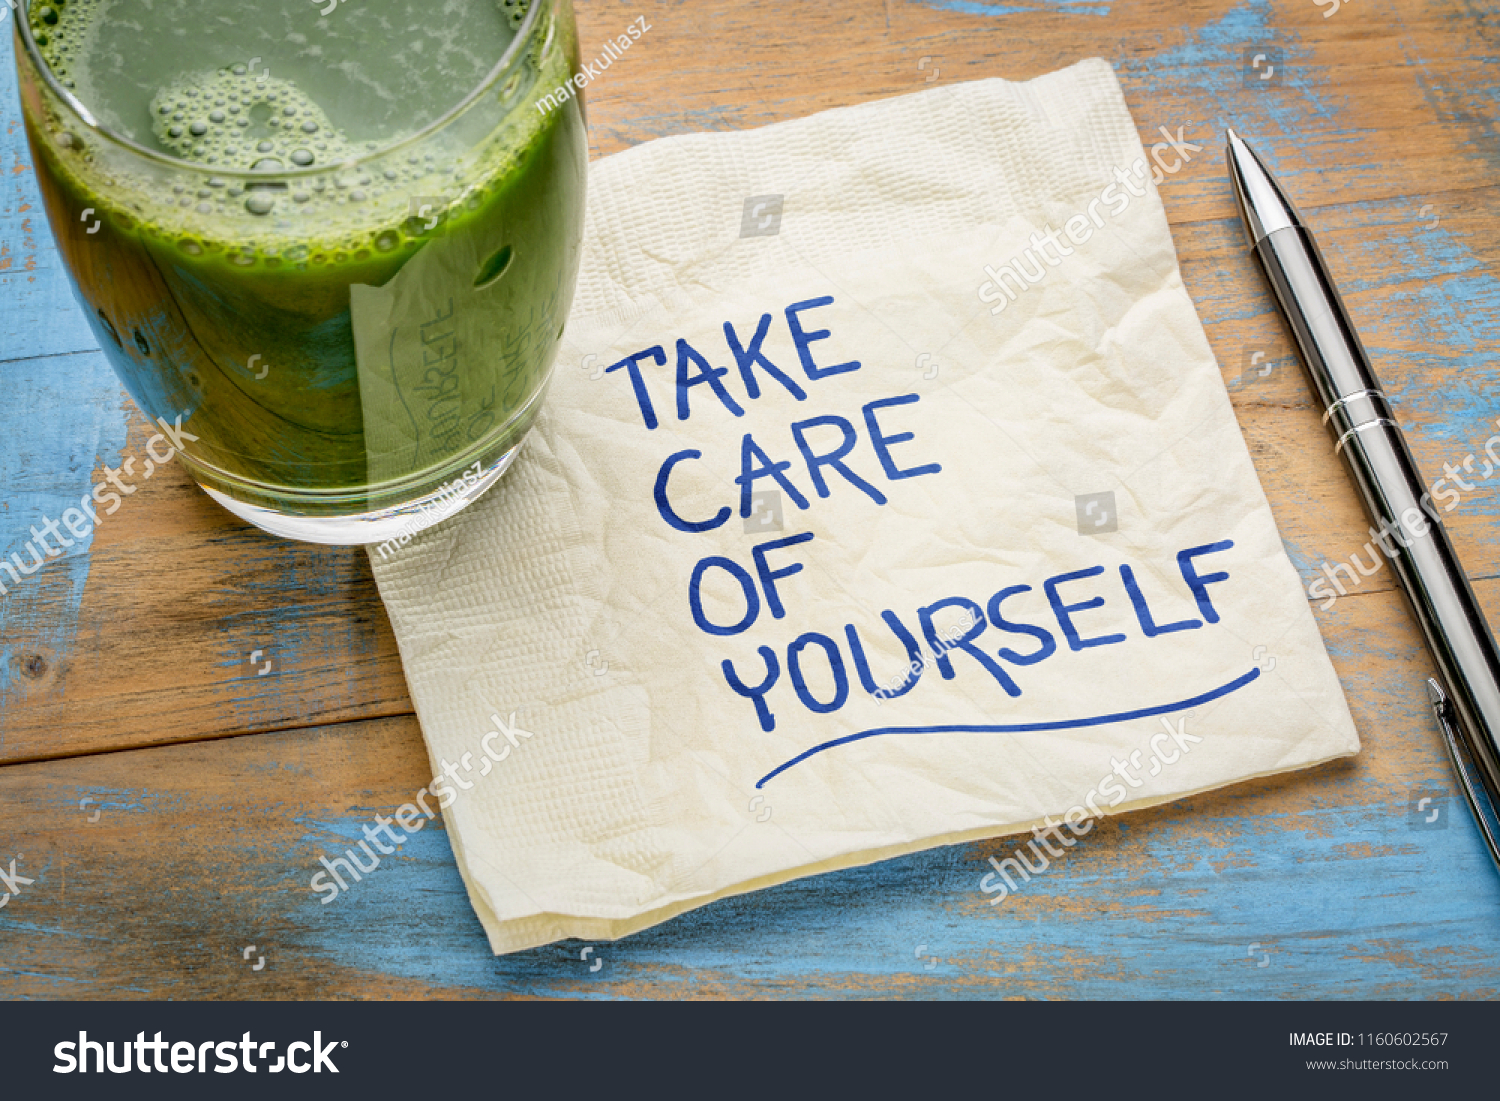 take care of yourself - inspirational handwriting on a napkin with a glass of green juice #1160602567